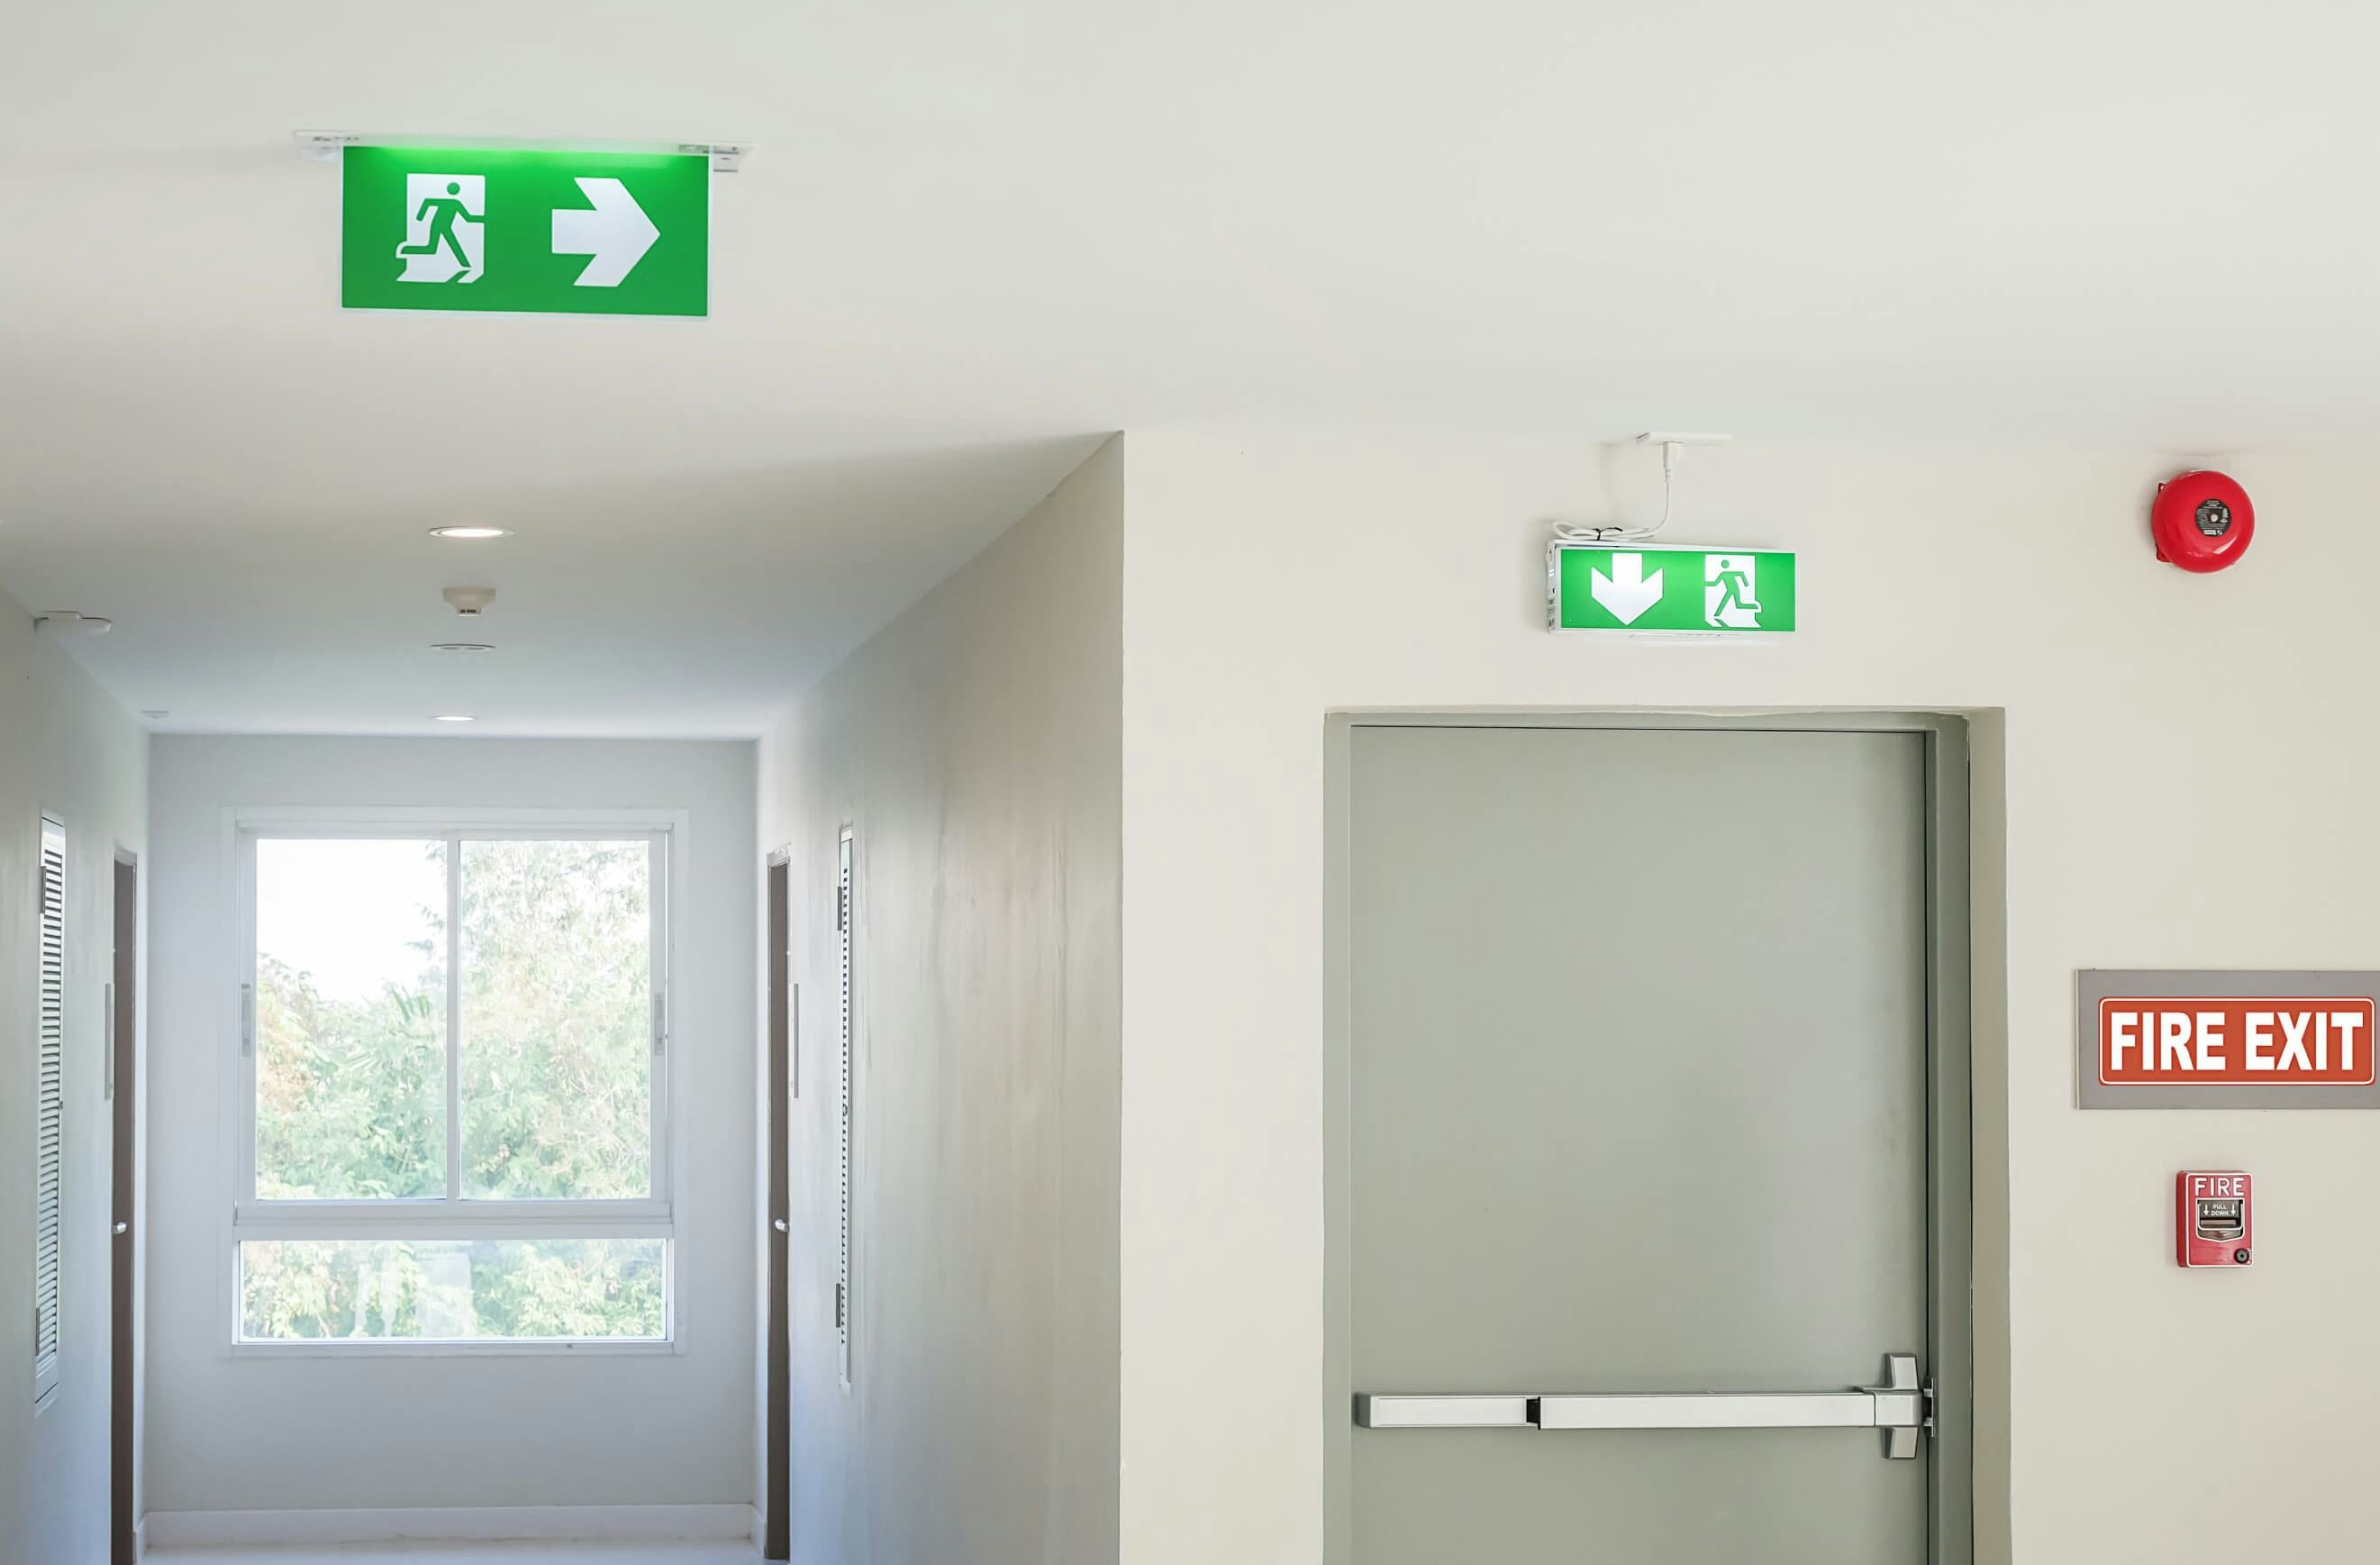 Window and door with fire exit sign above